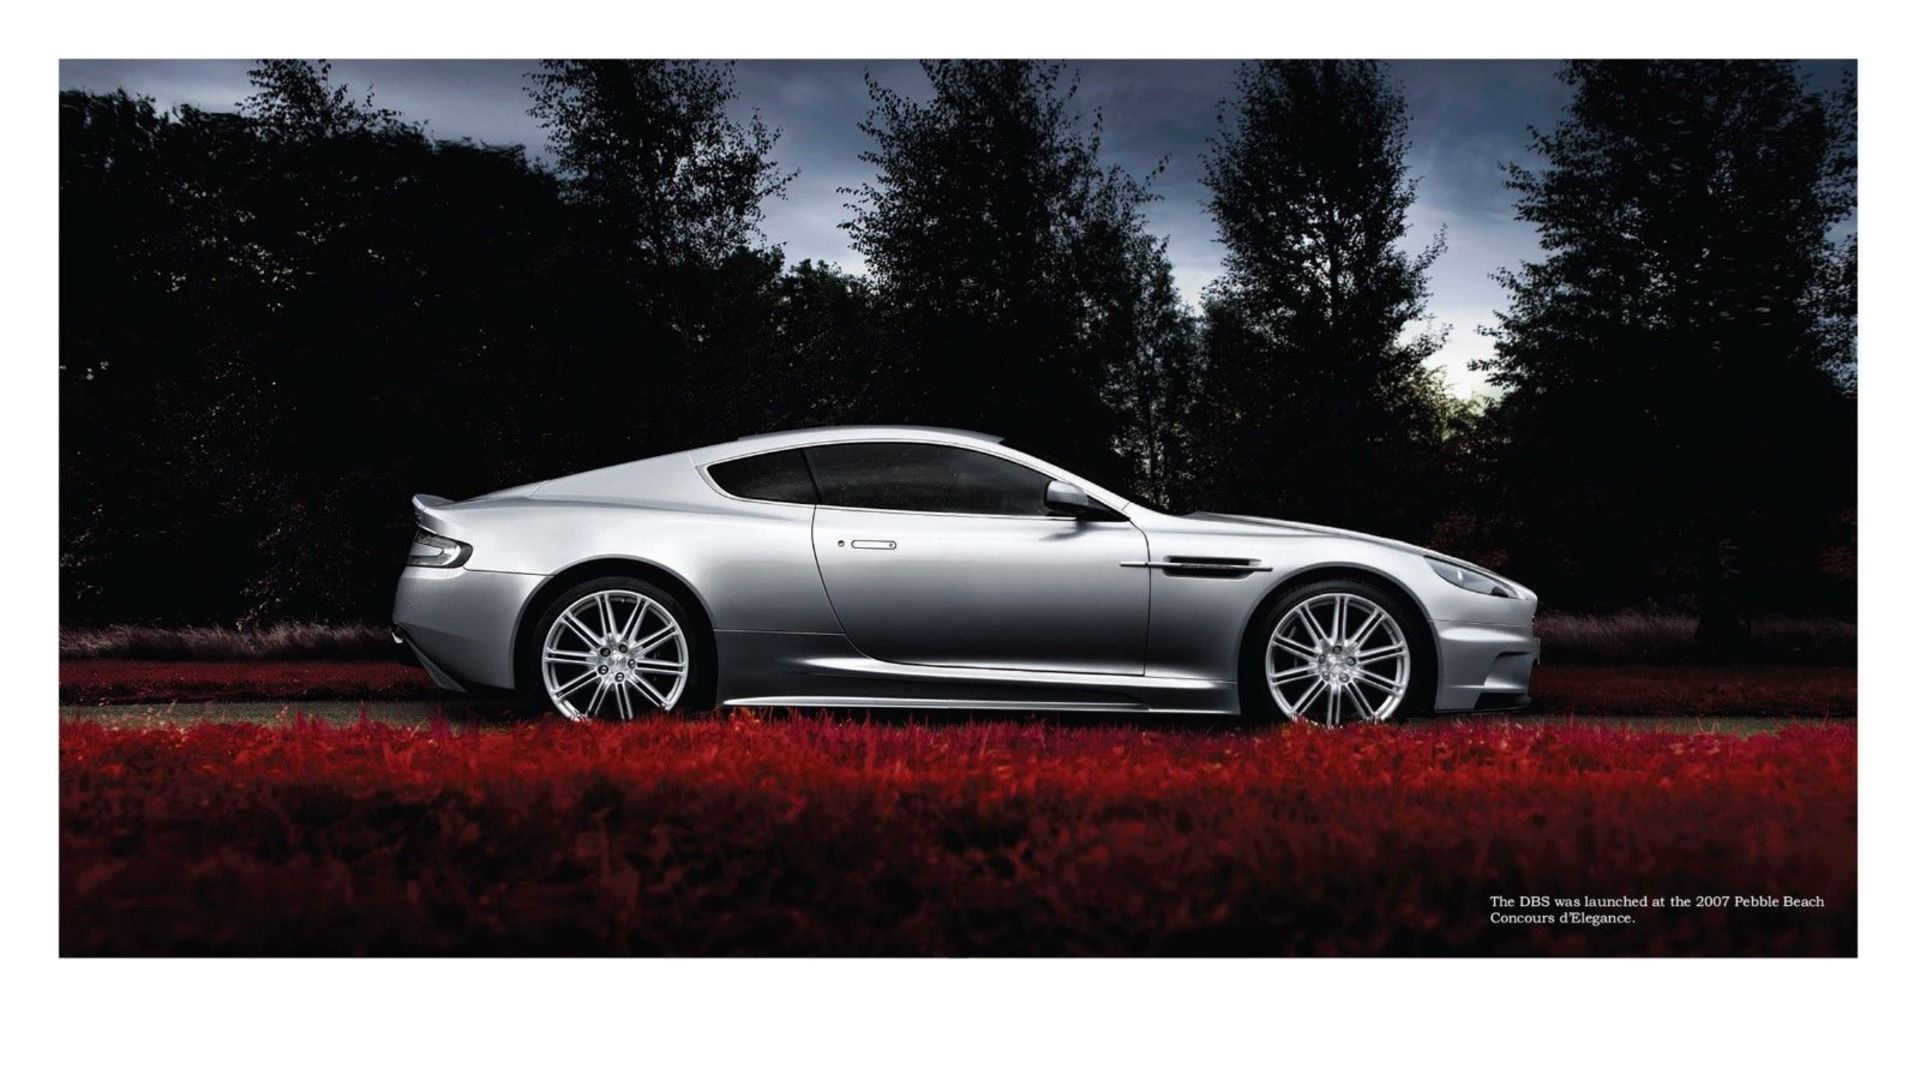 Portfolio of Dreams - Aston Martin Book , unused and signed by author - Image 6 of 9